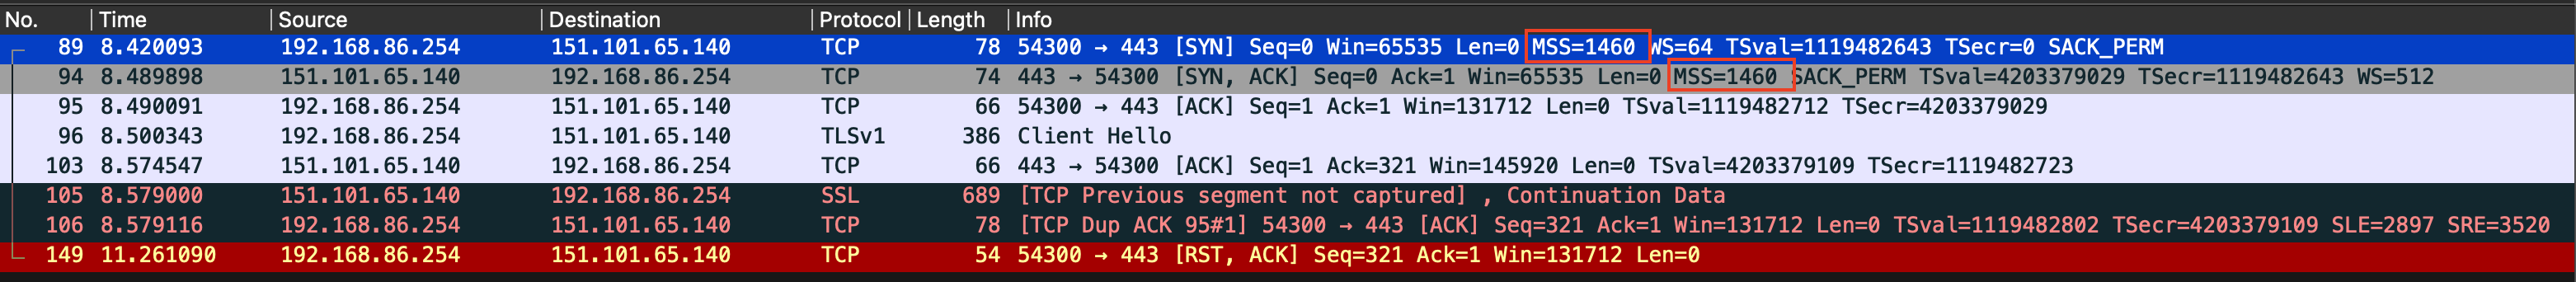 Wireguard screenshot showing captured packets on my laptop